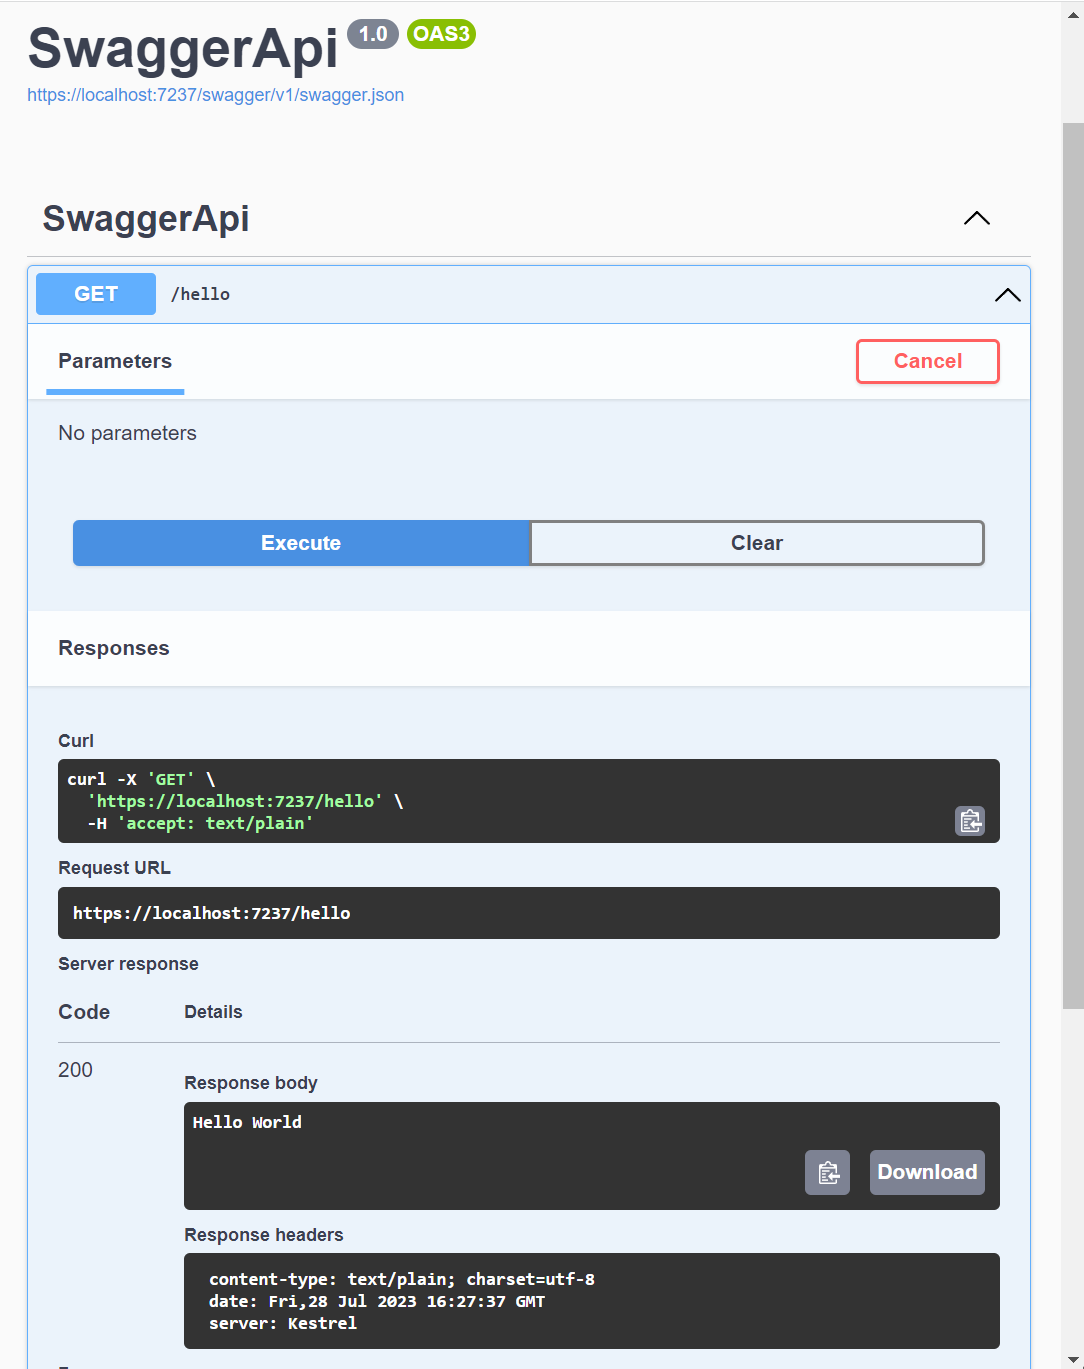 Swagger UI test for unsecured minimal API